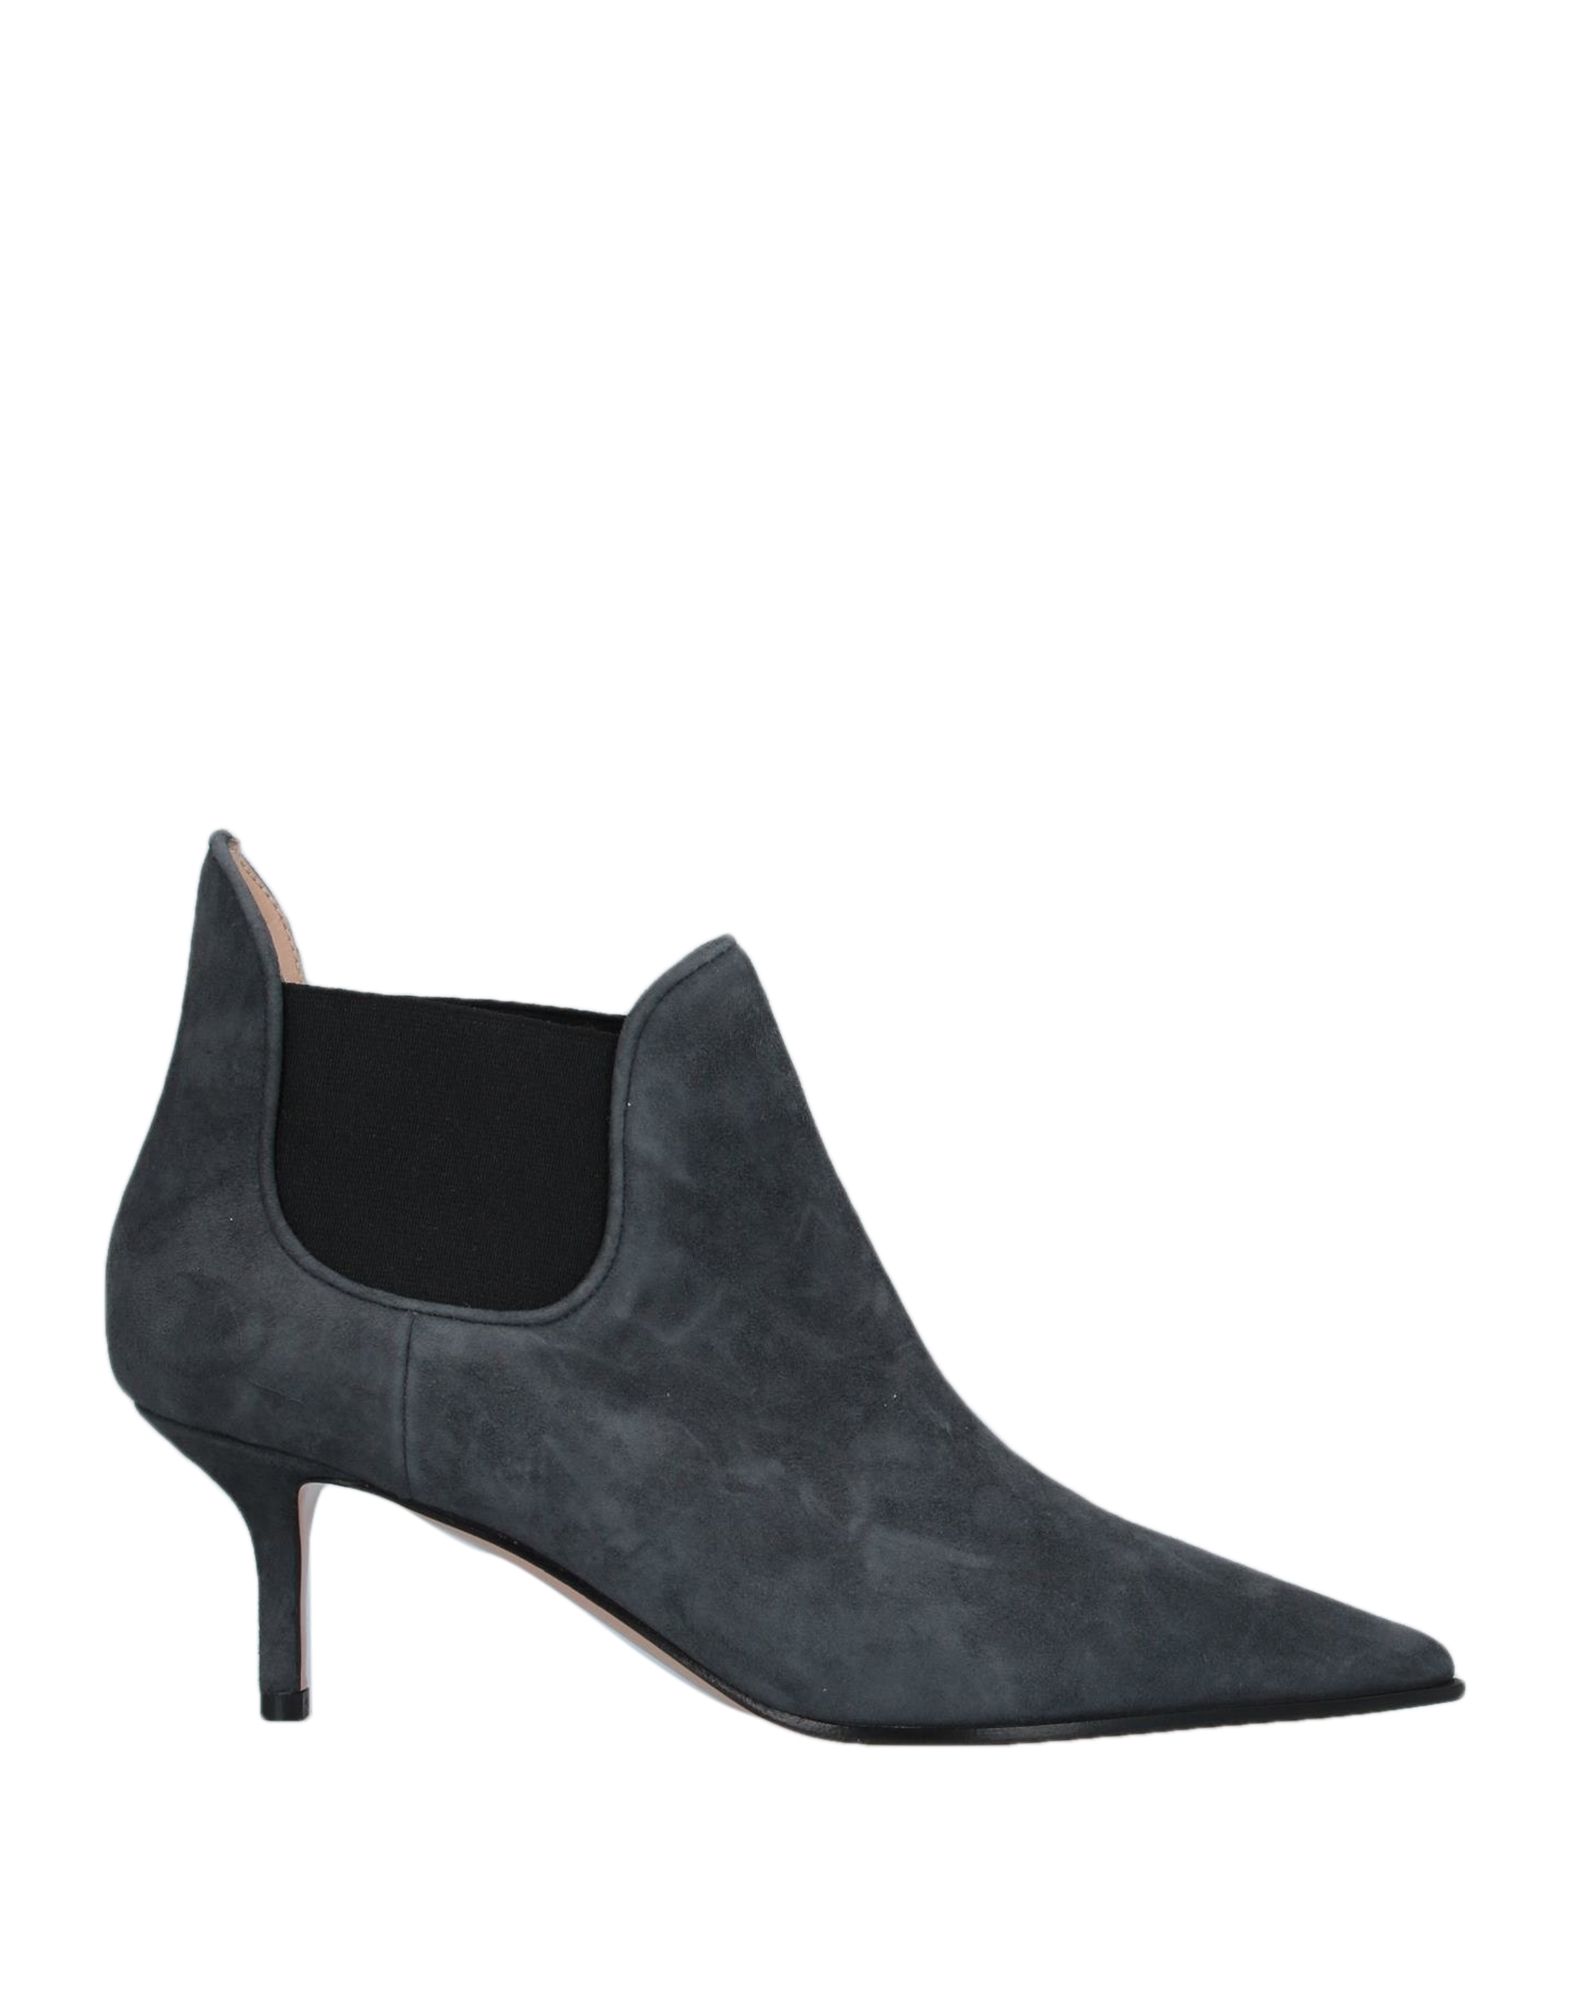 LERRE Ankle boots - Item 11889766